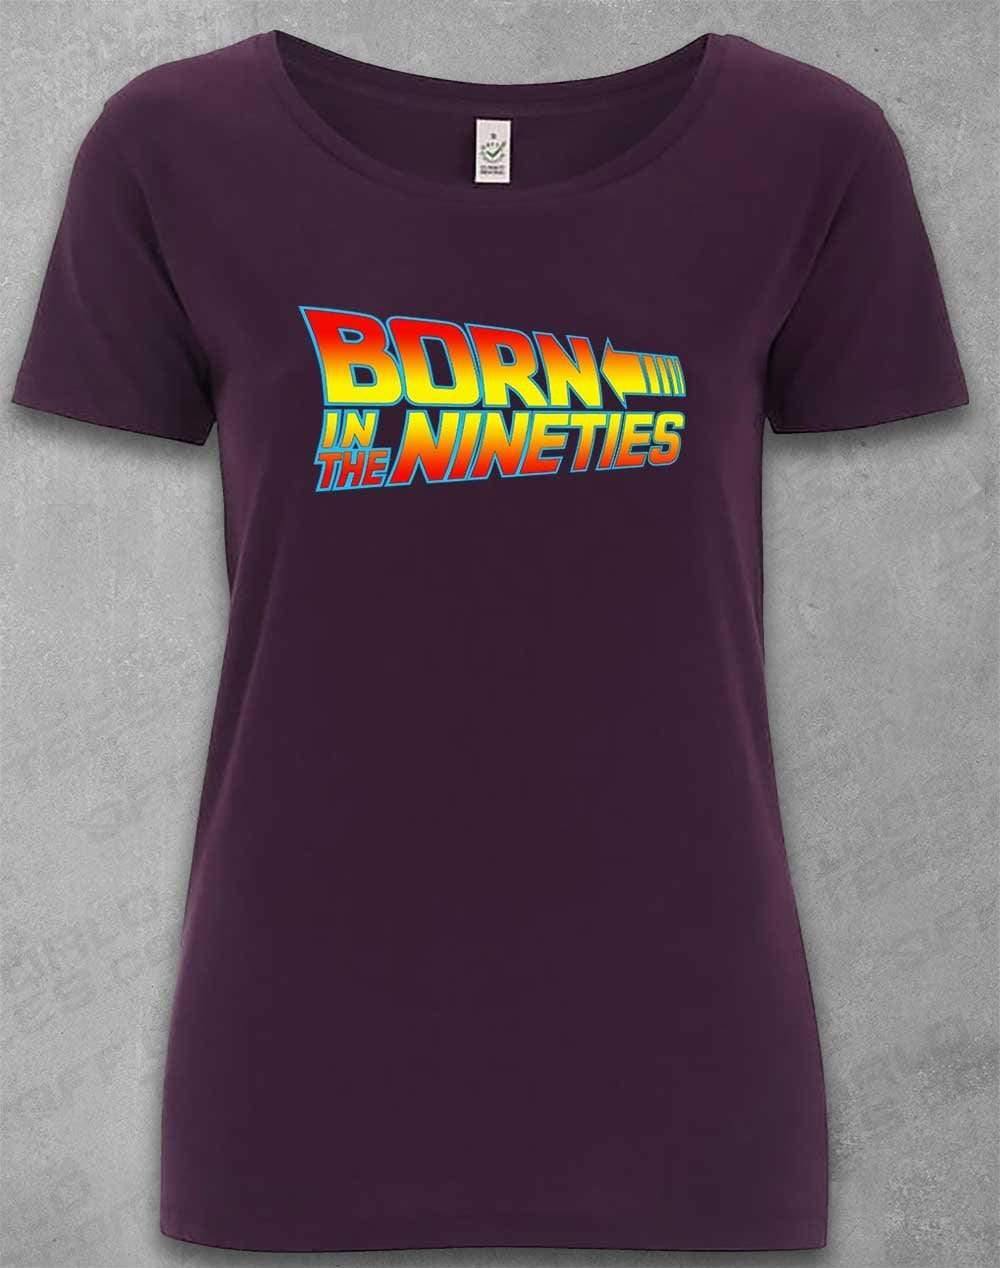 DELUXE Born in the... (CHOOSE YOUR DECADE!) Organic Scoop Neck T-Shirt 1990s - Eggplant / 8-10  - Off World Tees